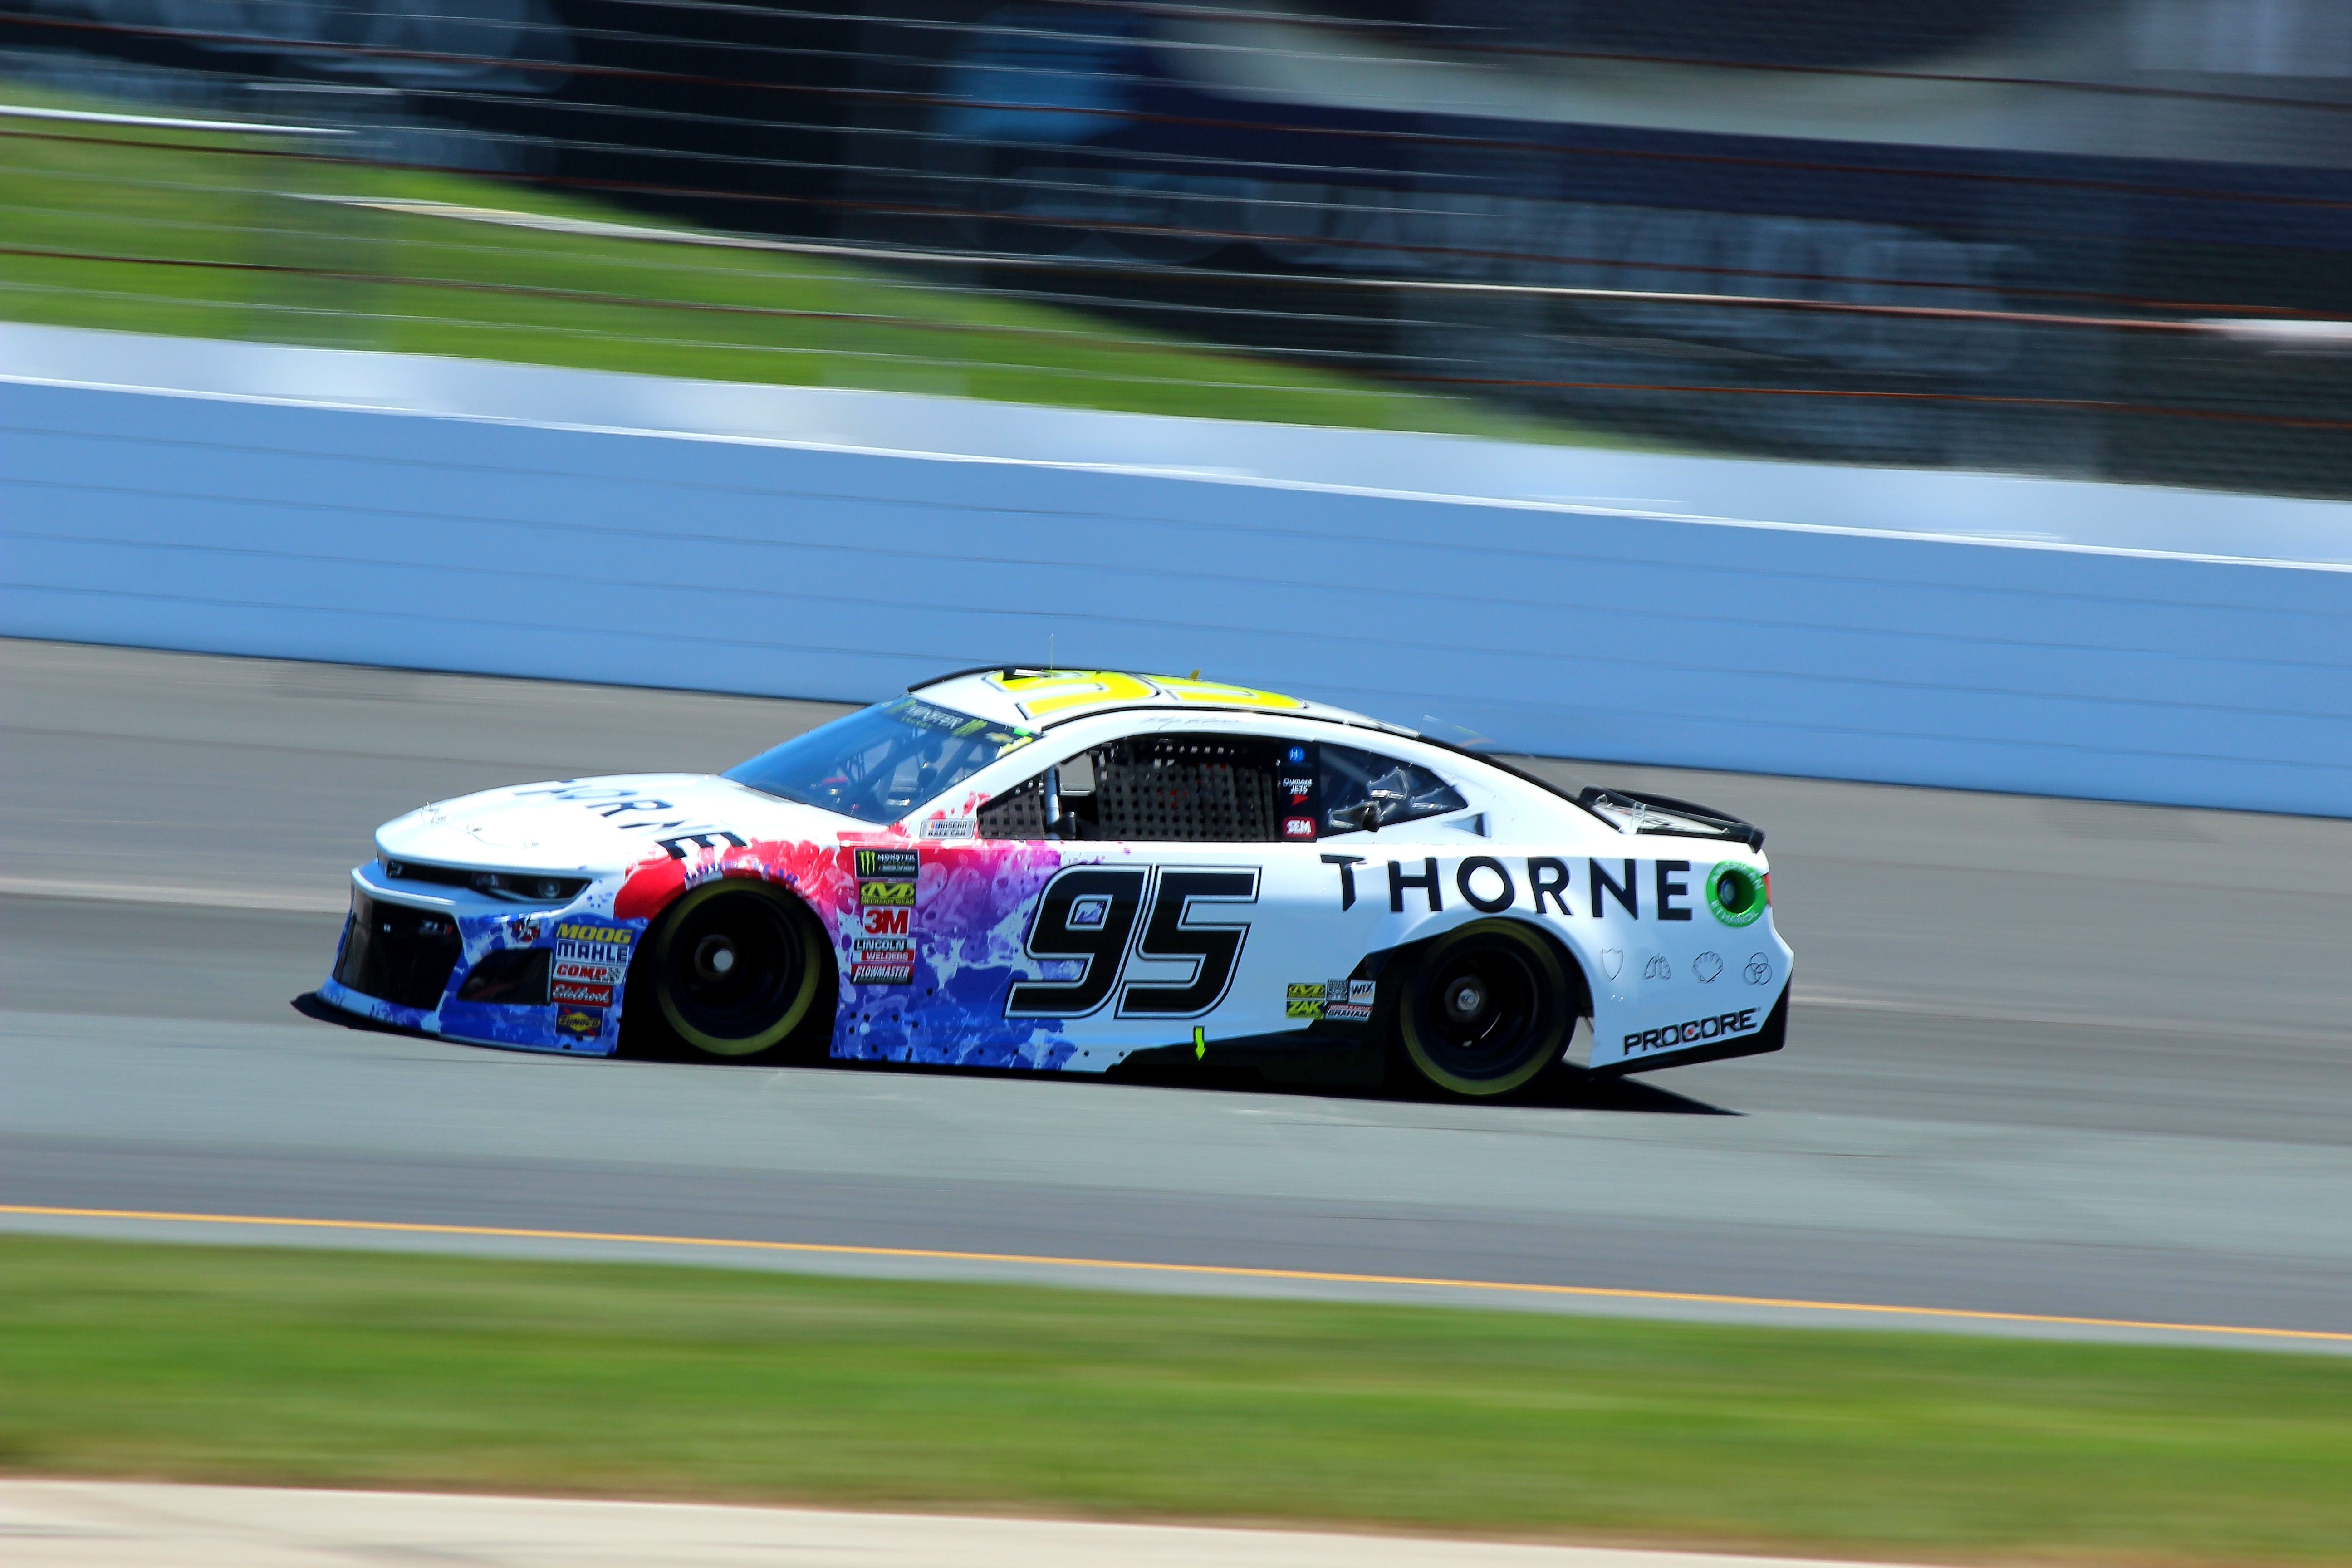 Despite some tough outings at the track, Kahne's seen the positives with his No. 95 team's growth and progress in 2018. (Photo Credit: Josh Jones/TPF)